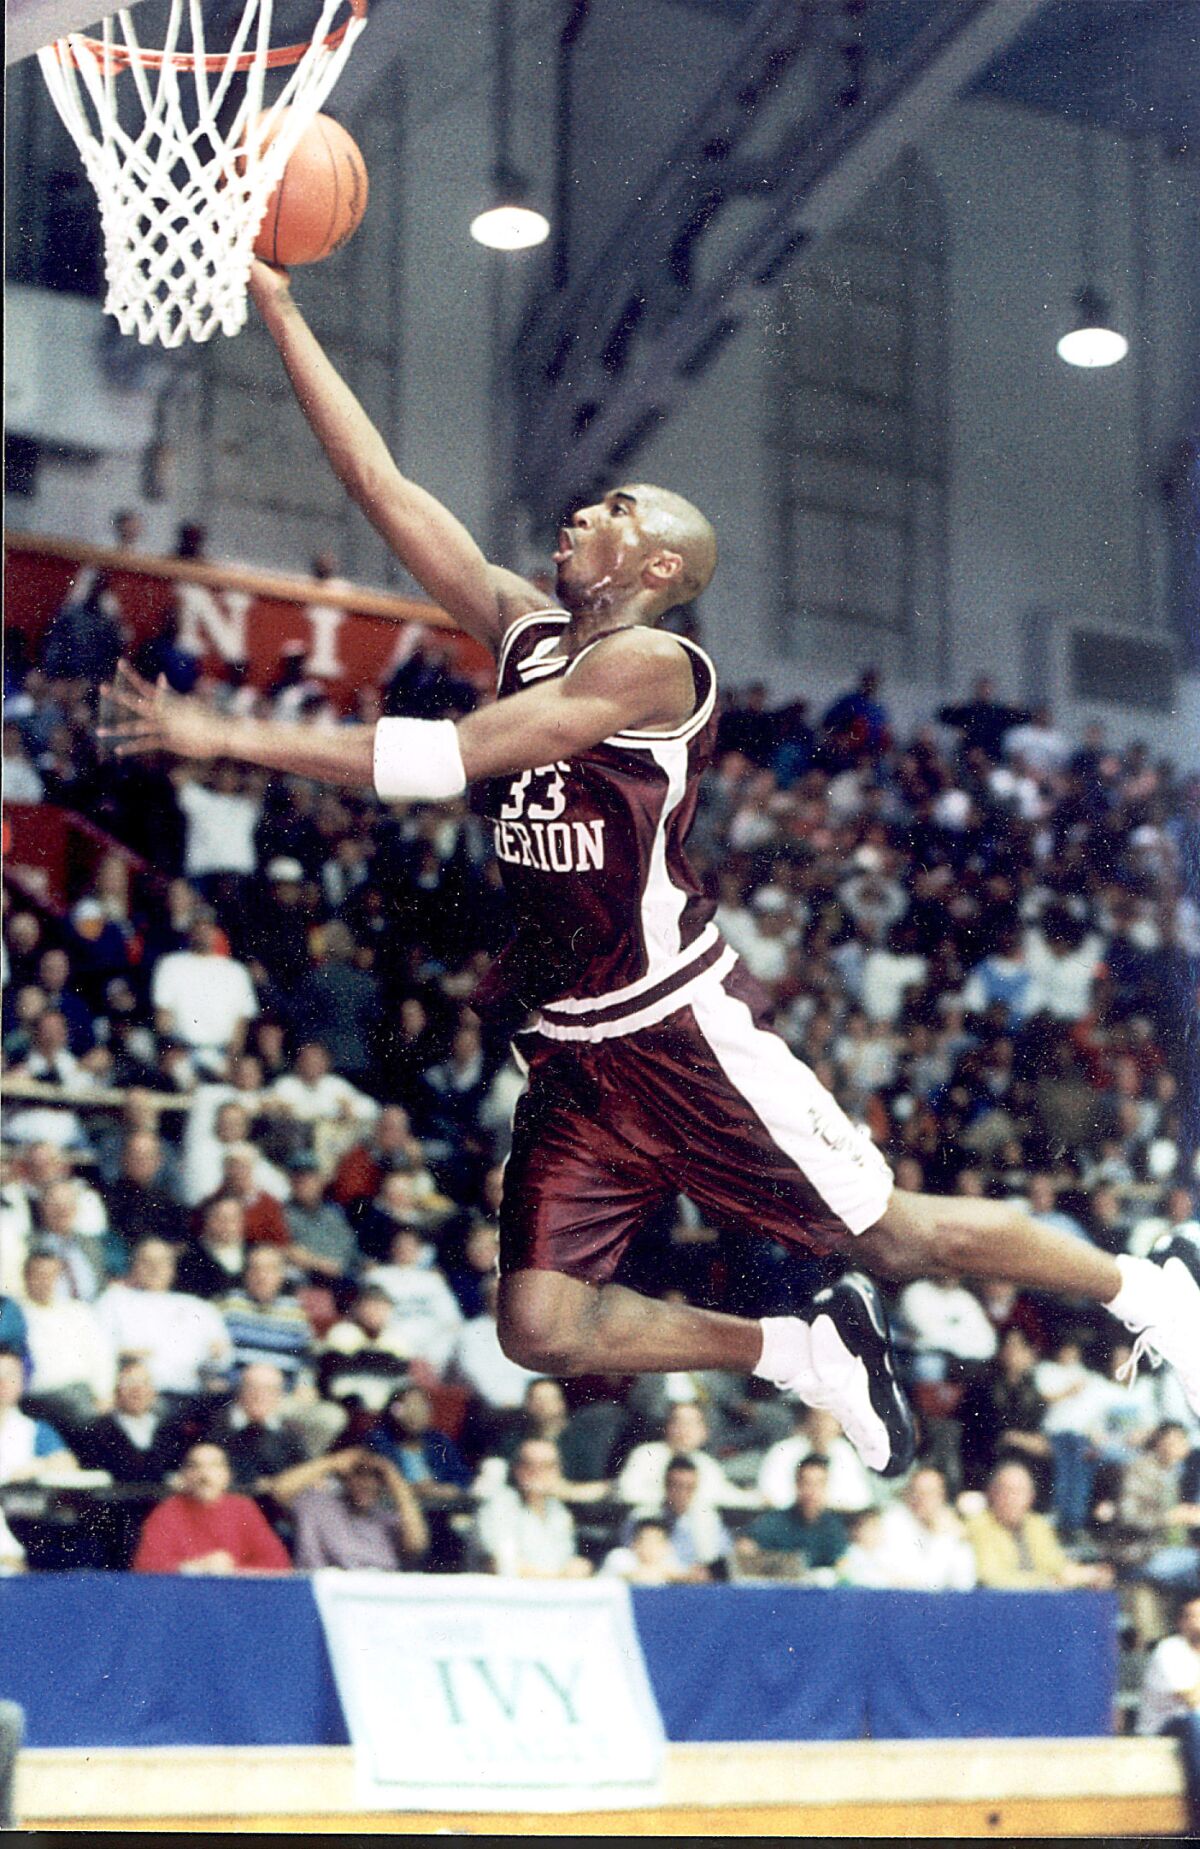 A mid-air shot of a basketball player reaching to the basket with the ball in one hand.